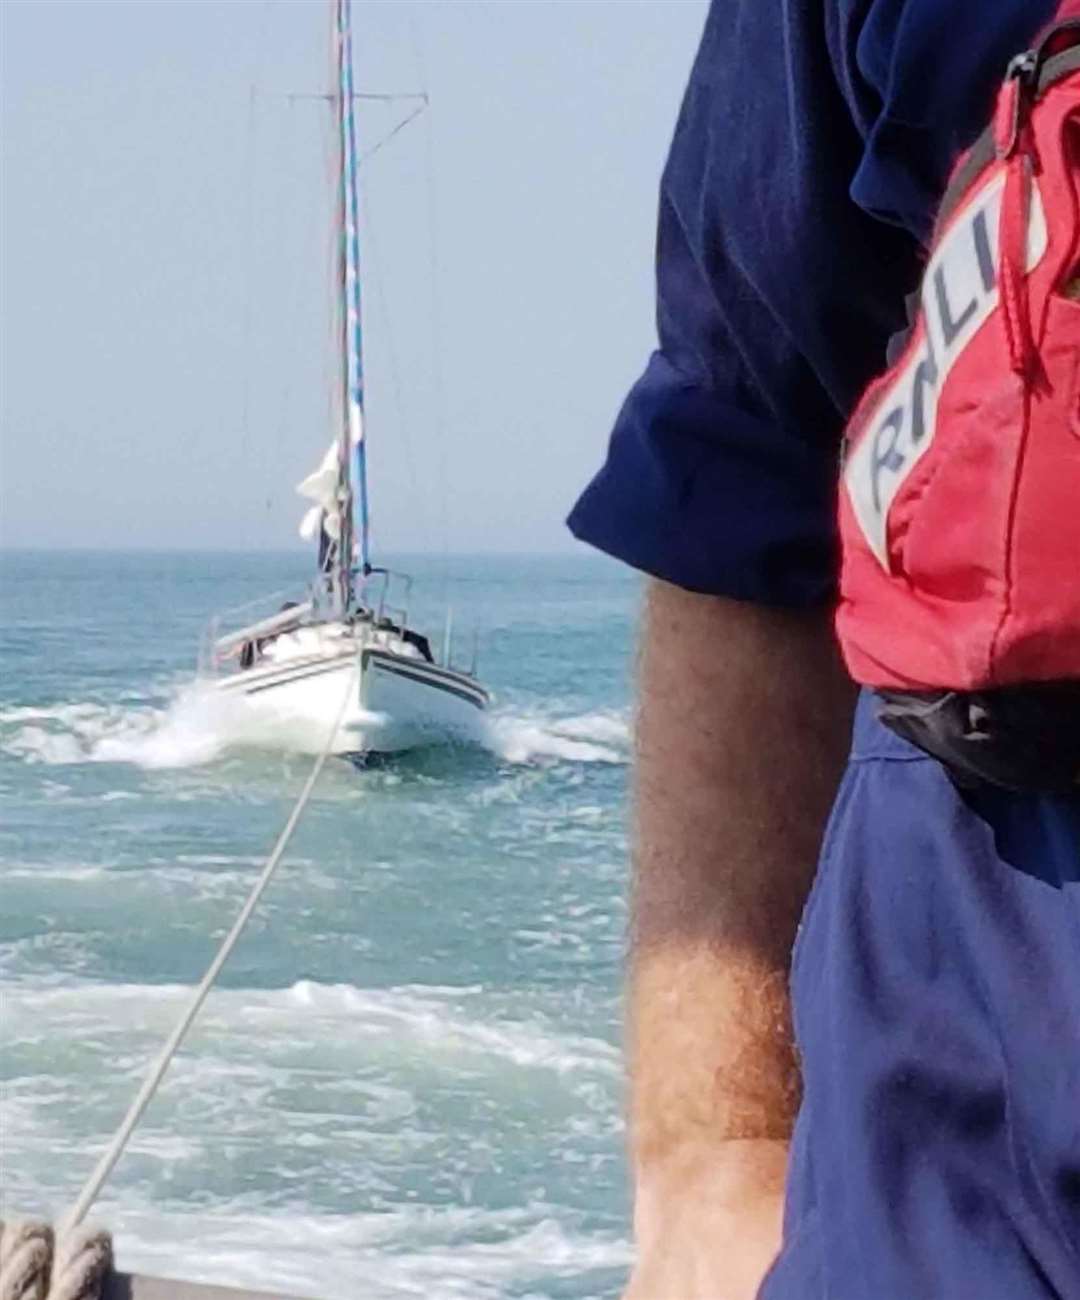 Margate RNLI assists disabled yacht. Credit: RNLI (3192722)